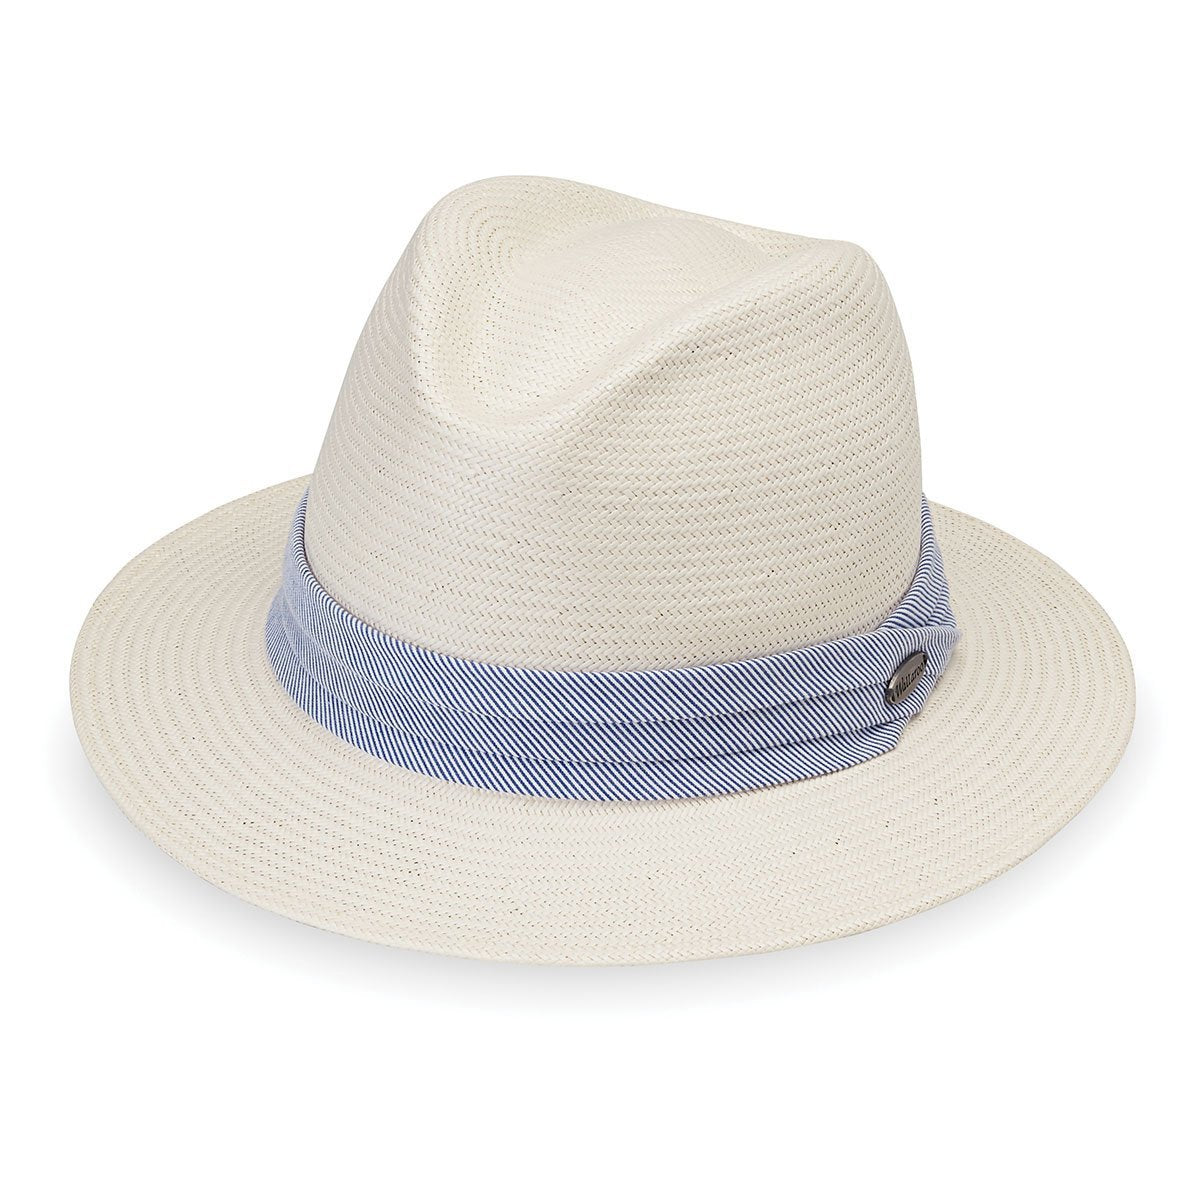 Featuring Front of Women's Fedora Style Monterey UPF Sun Hat in Natural with Blue Pinstripe from Wallaroo